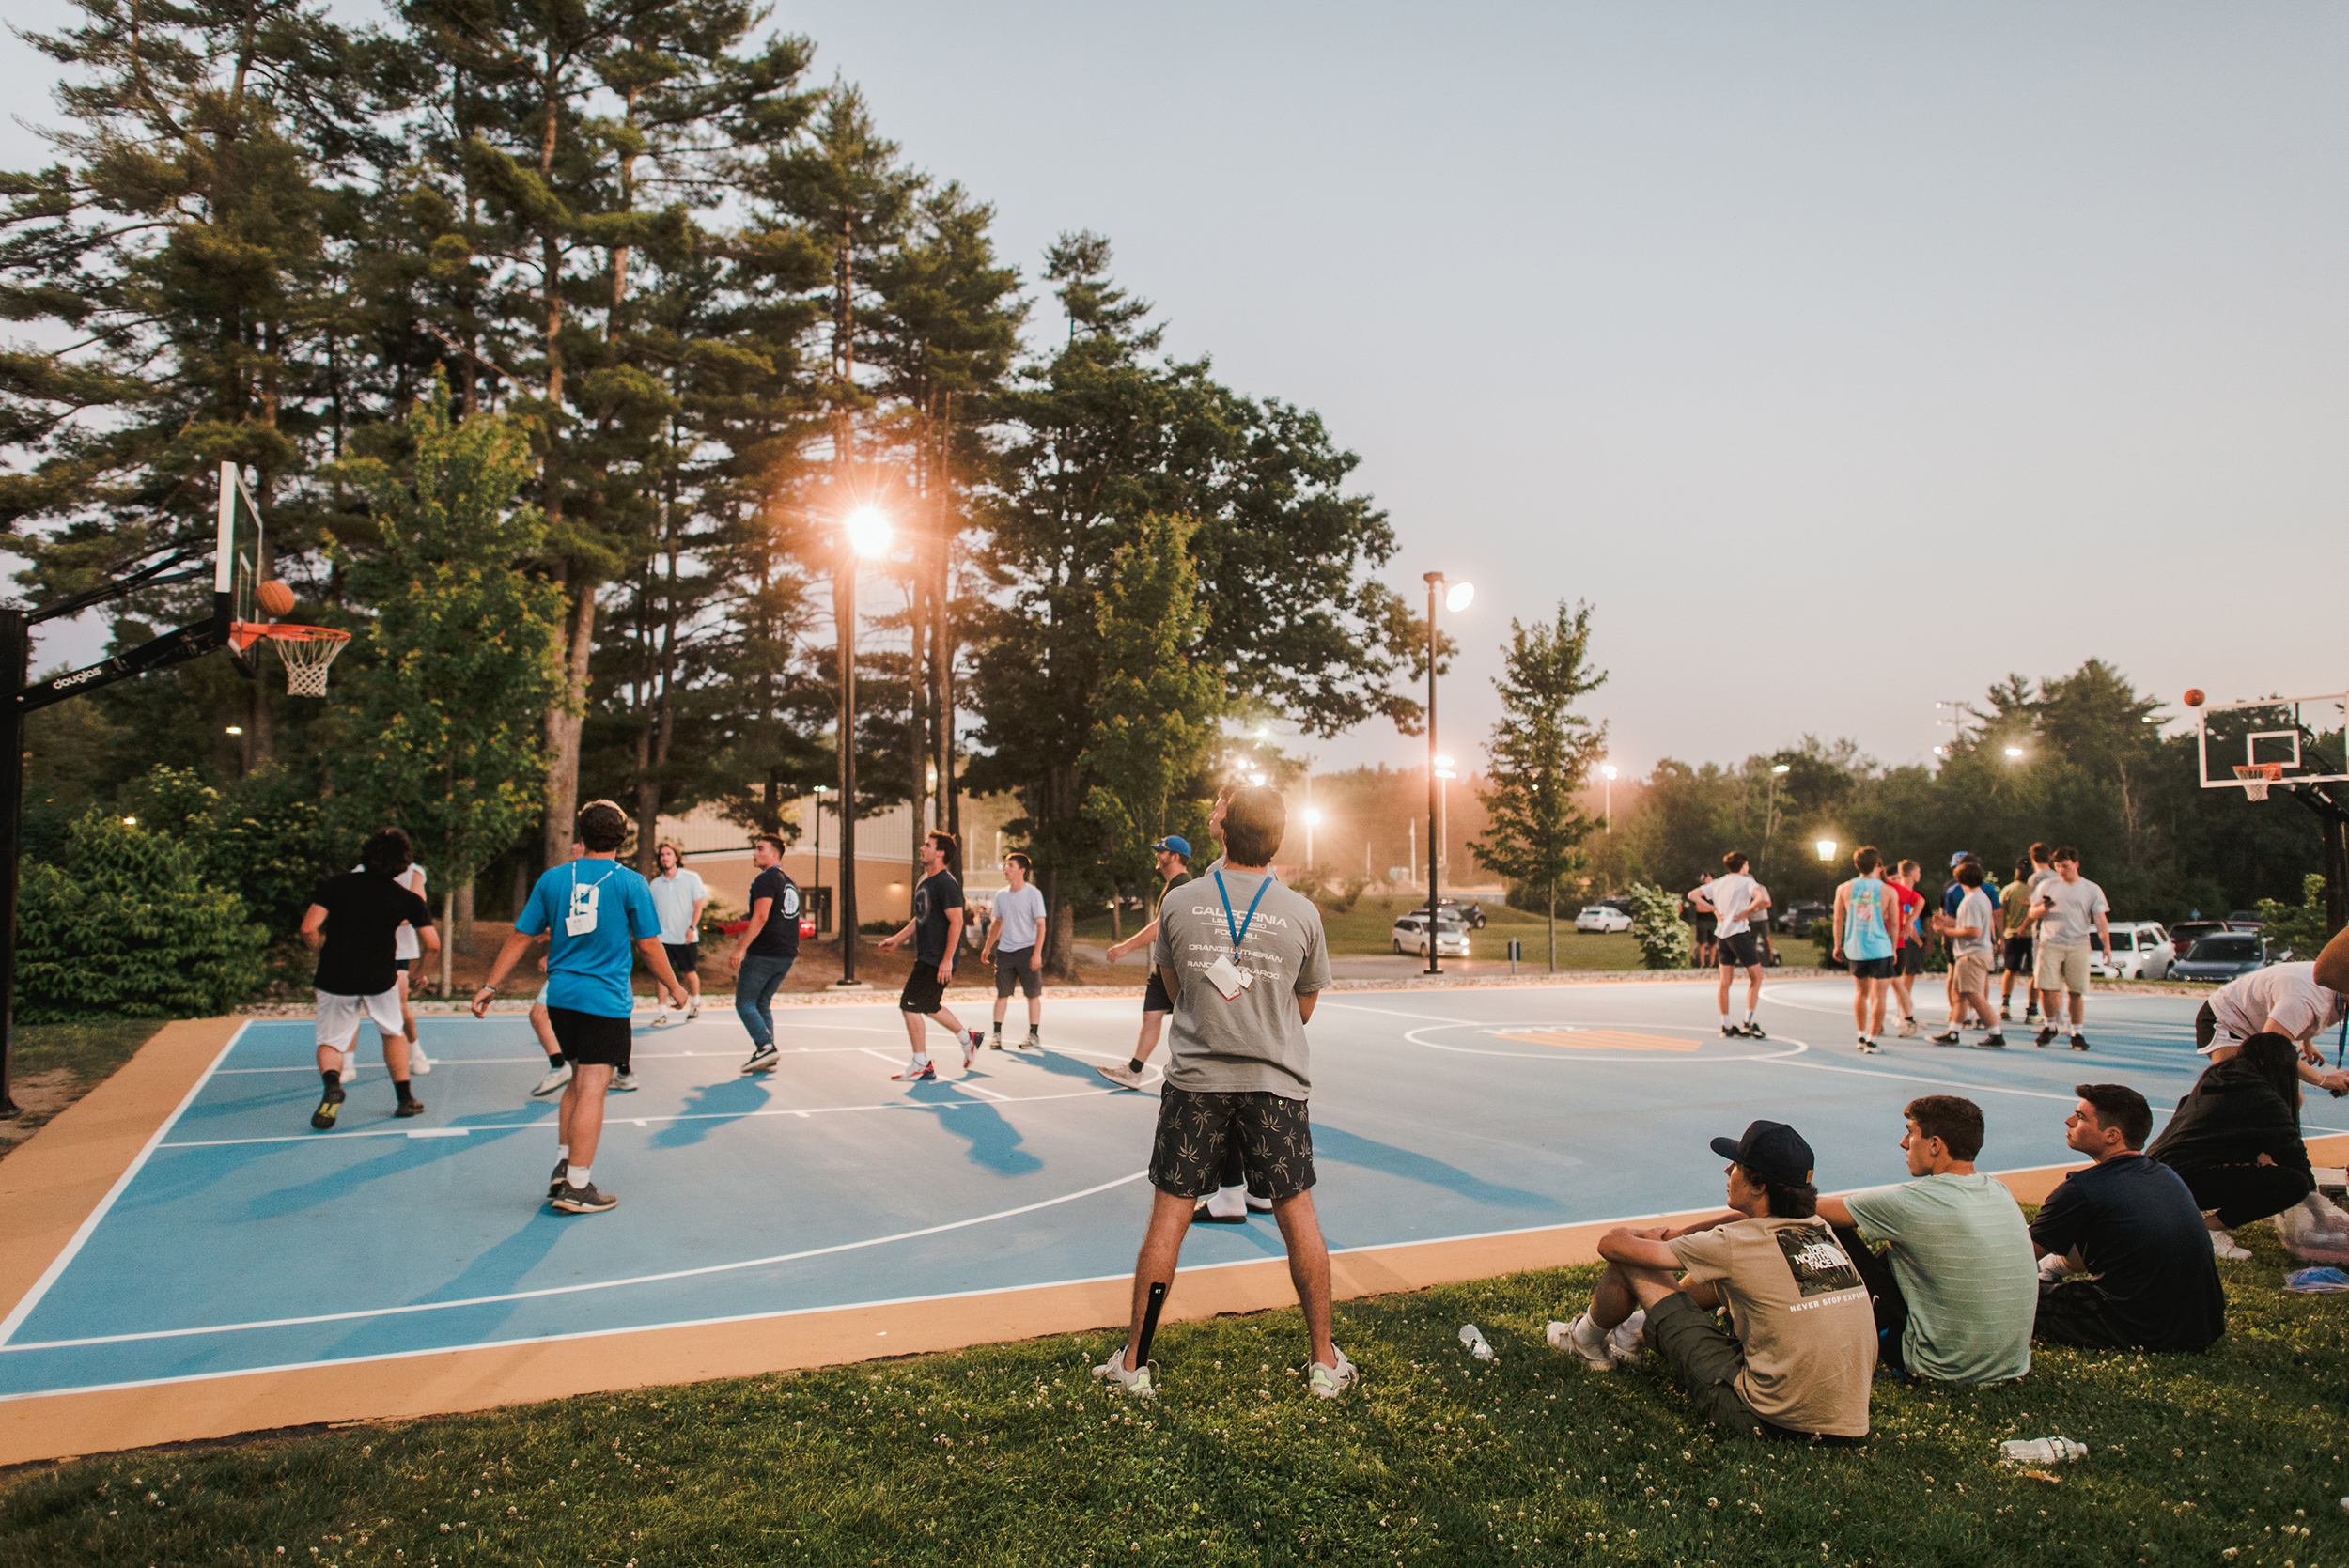 Students playing basketball on Clark's Court